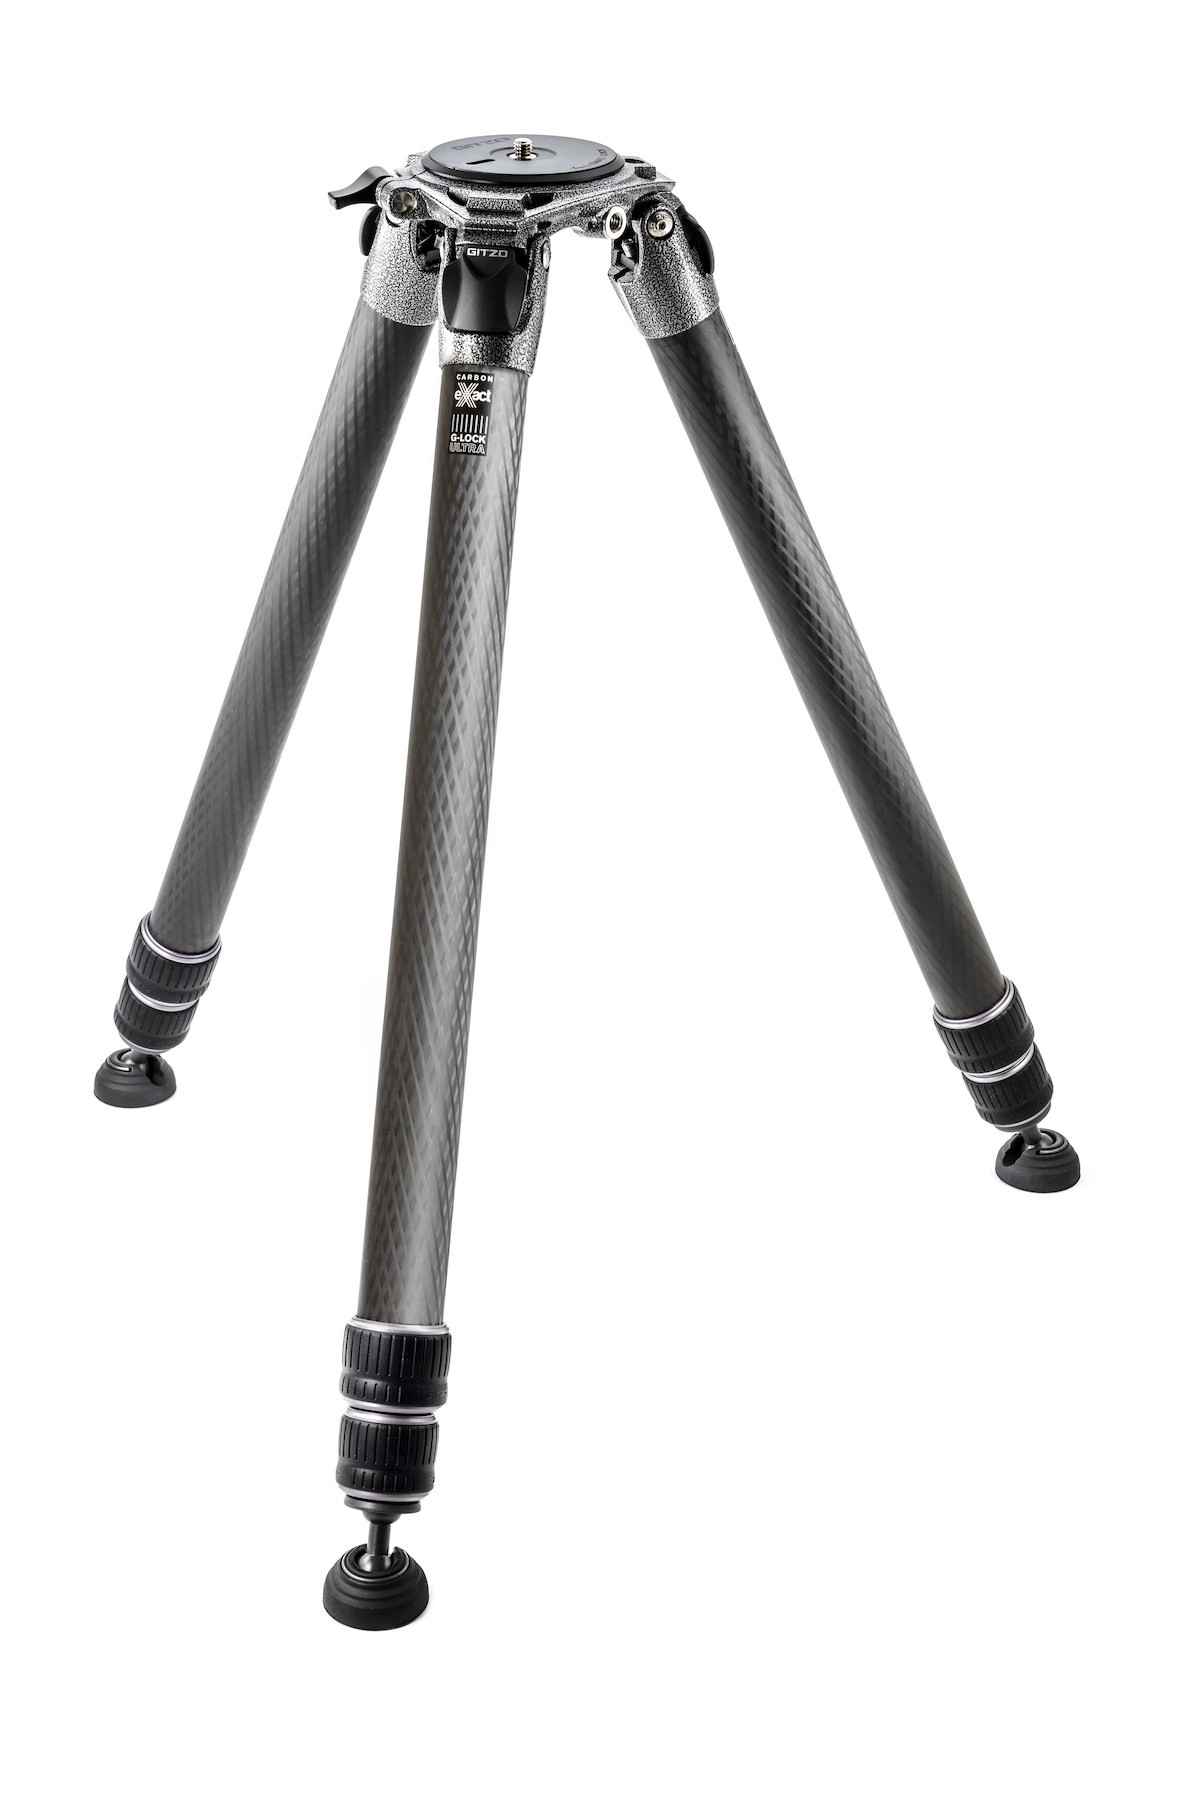 Gitzo tripod Systematic, series 5 long, 3 sections